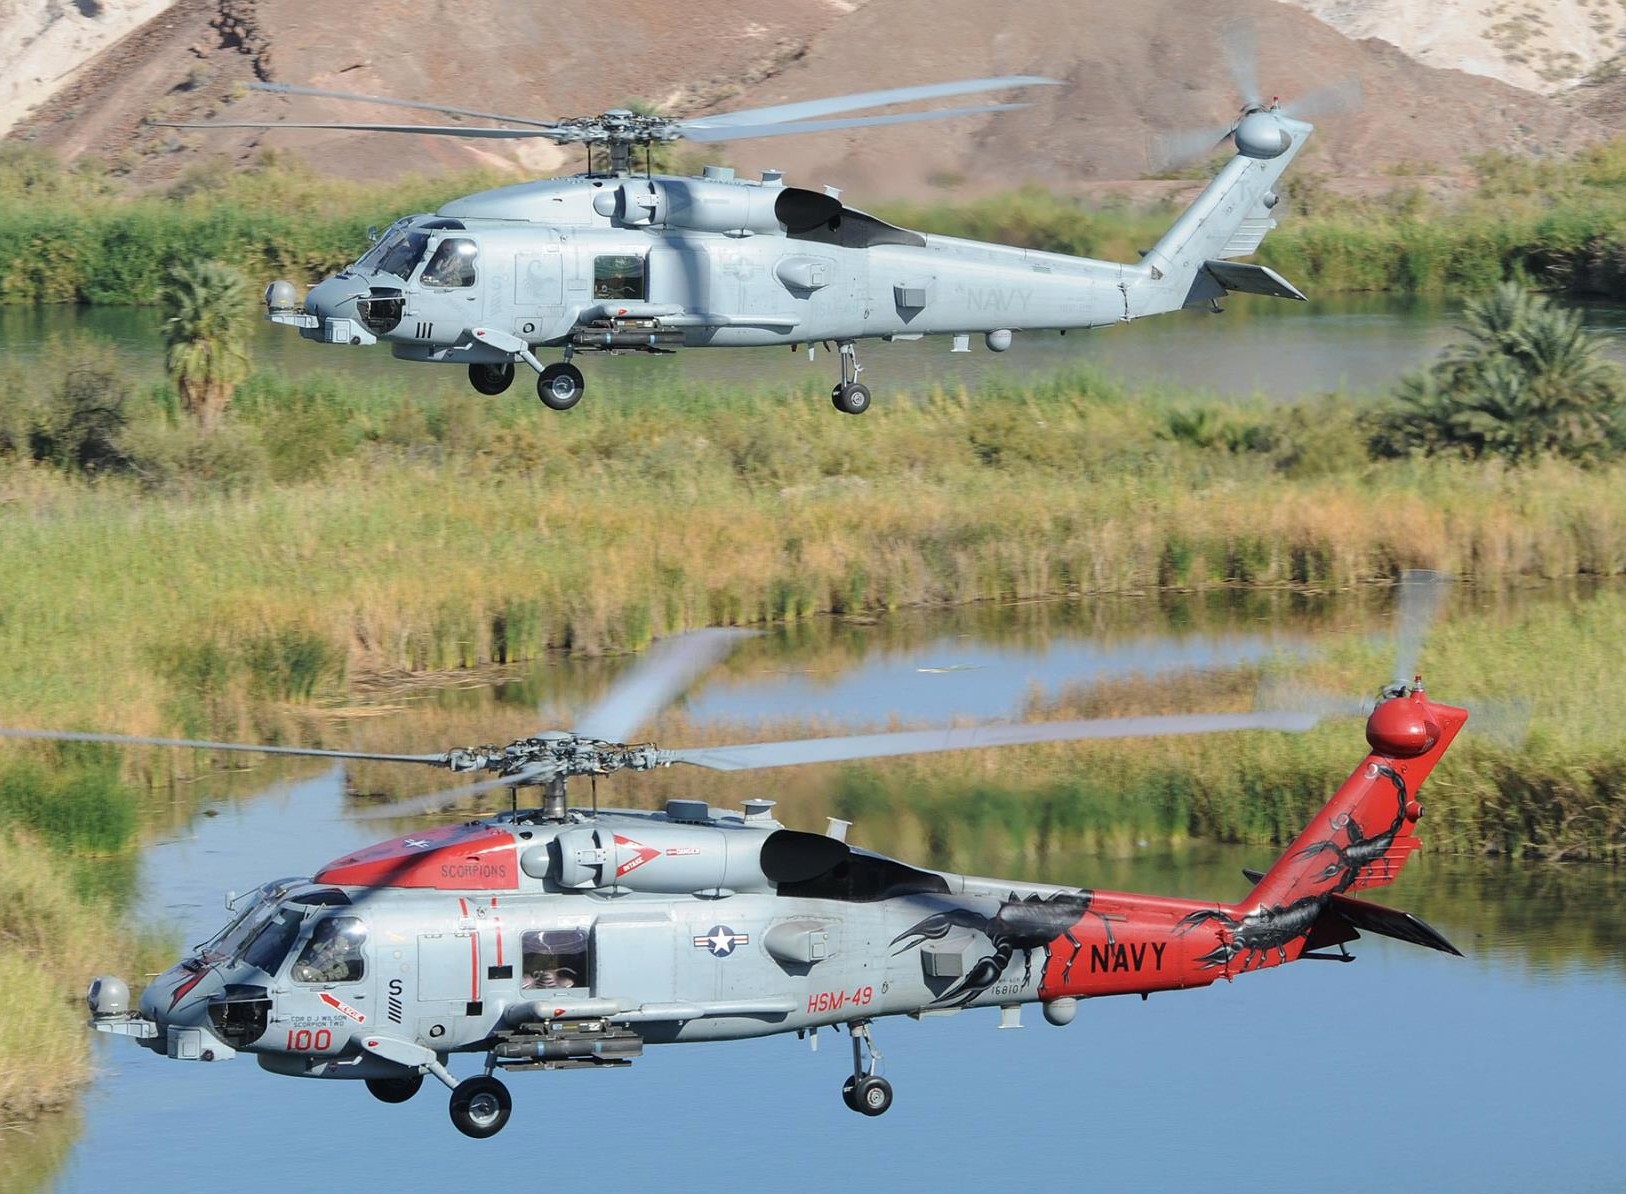 hsm-49 scorpions helicopter maritime strike squadron mh-60r seahawk 15